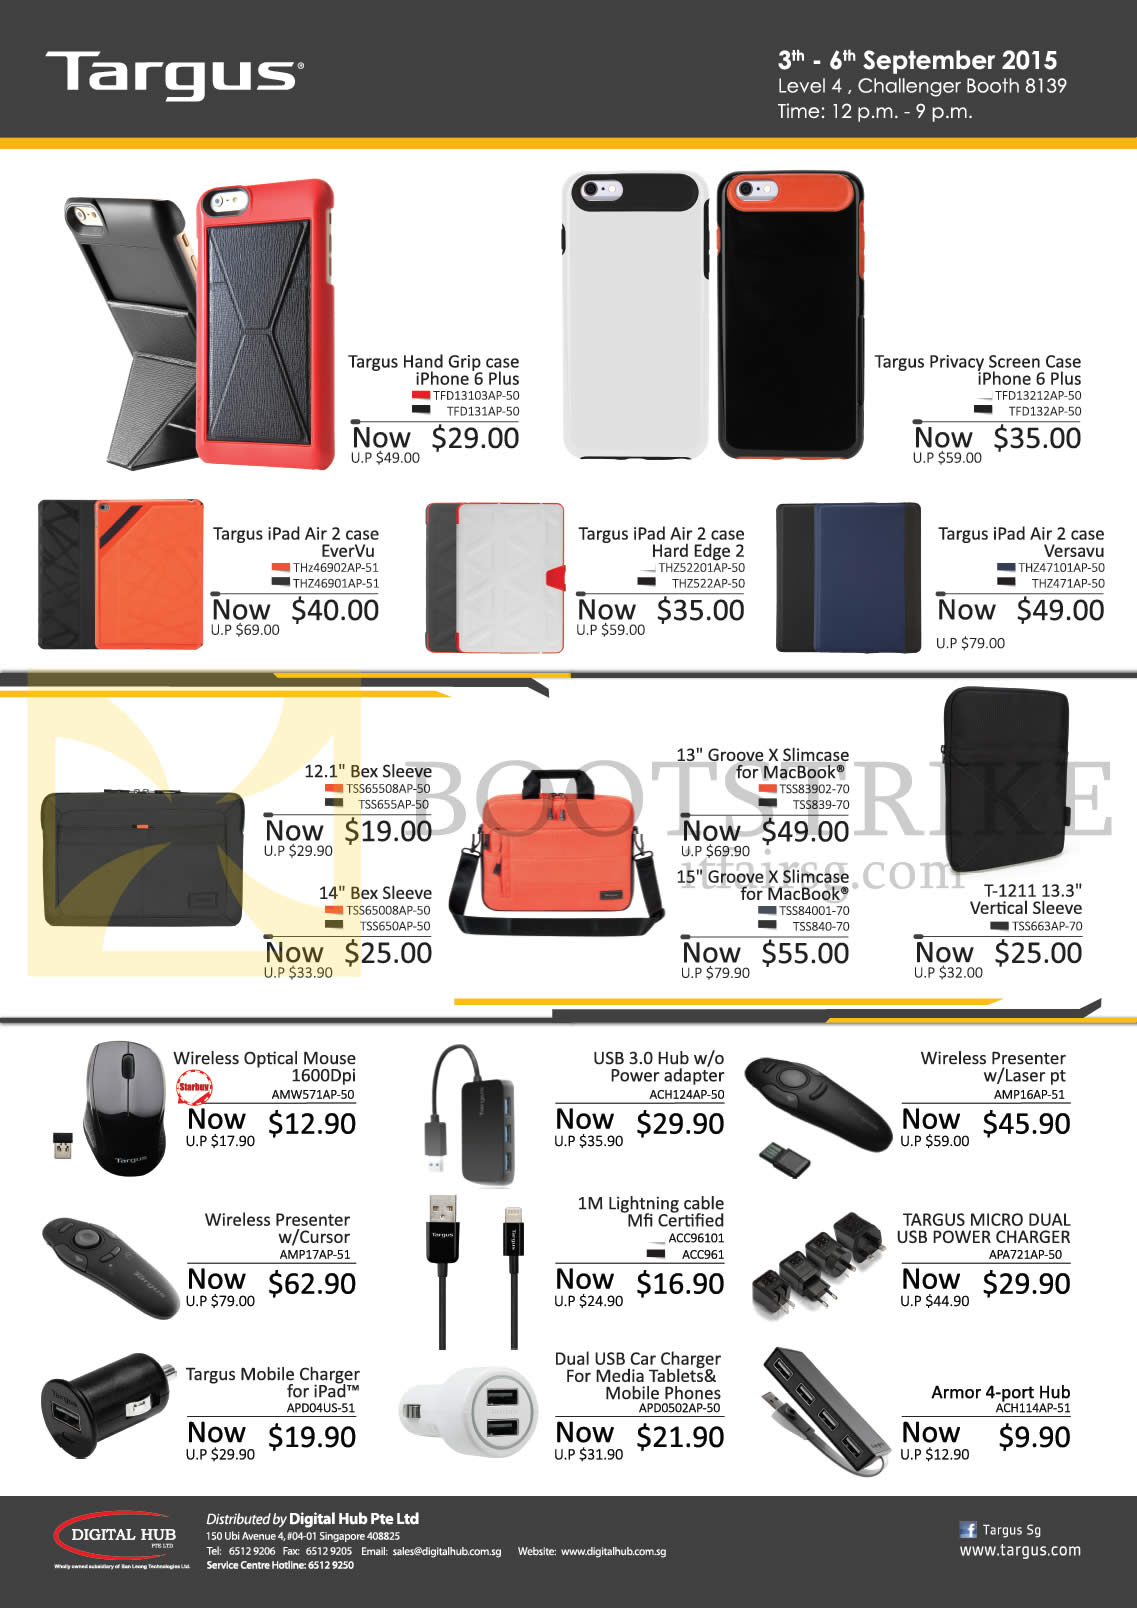 COMEX 2015 price list image brochure of Challenger Targus Cases For IPhone 6 Plus, IPad Air 2, MacBook, Accessories, Mouse, Wireless Presenter, USB 3.0 Hub, USB Power Charger, Car Charger, Lightning Cable